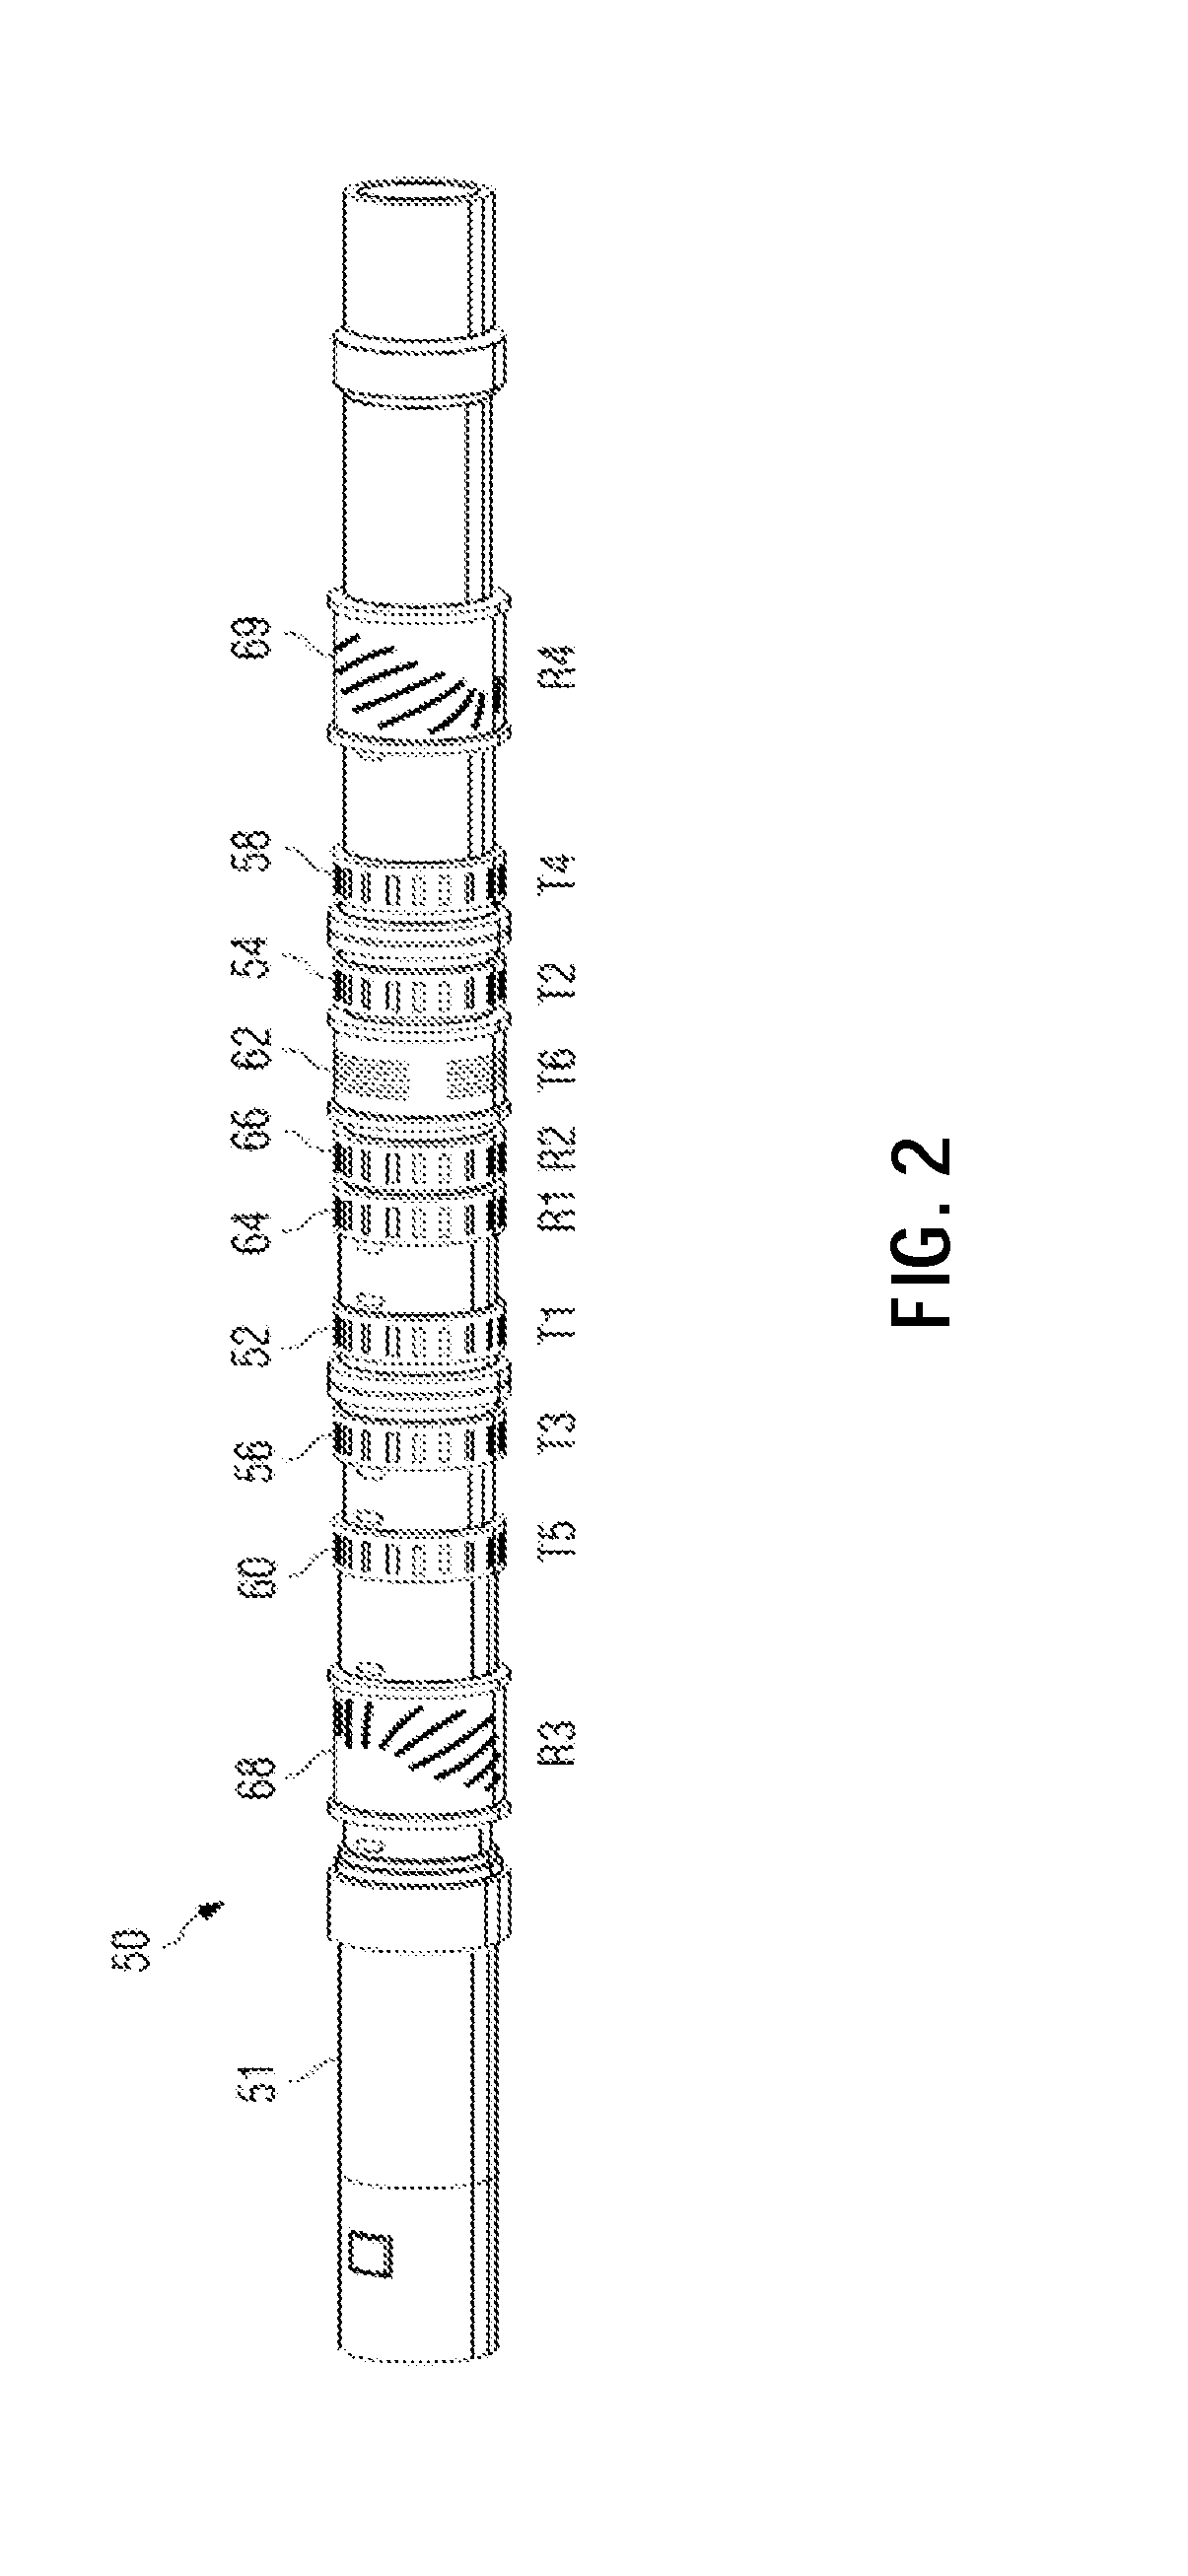 Method for Selecting Bed Boundaries and Log Squaring Using Electromagnetic Measurements